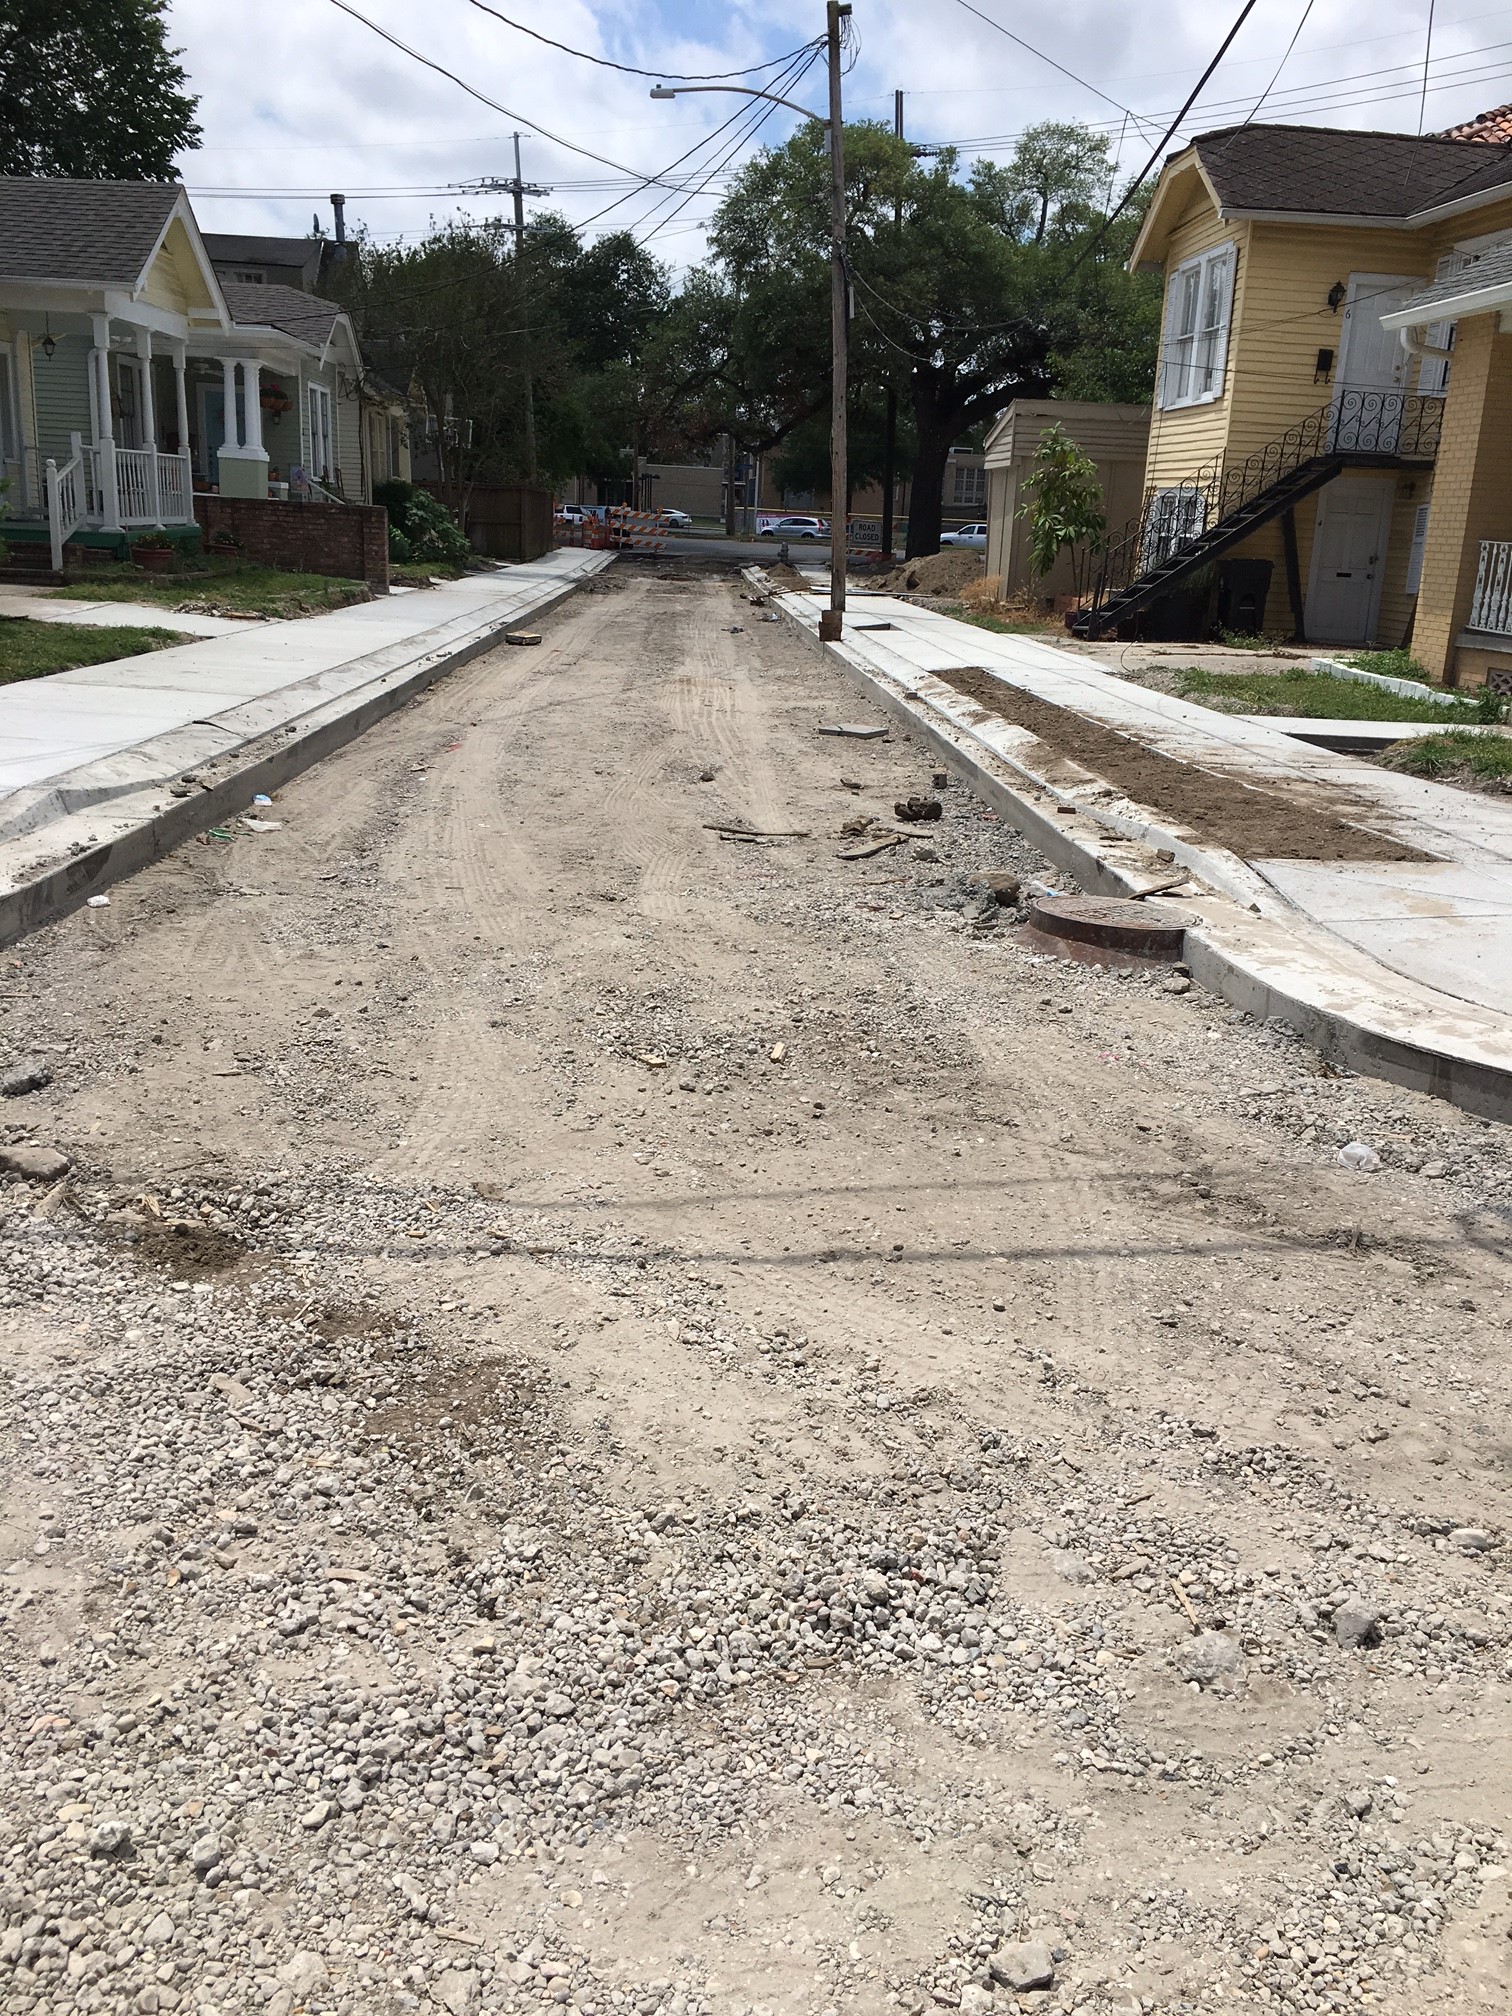 New Driveways and Sidewalks Completed on S. Johnson and Melodia Ct. Project